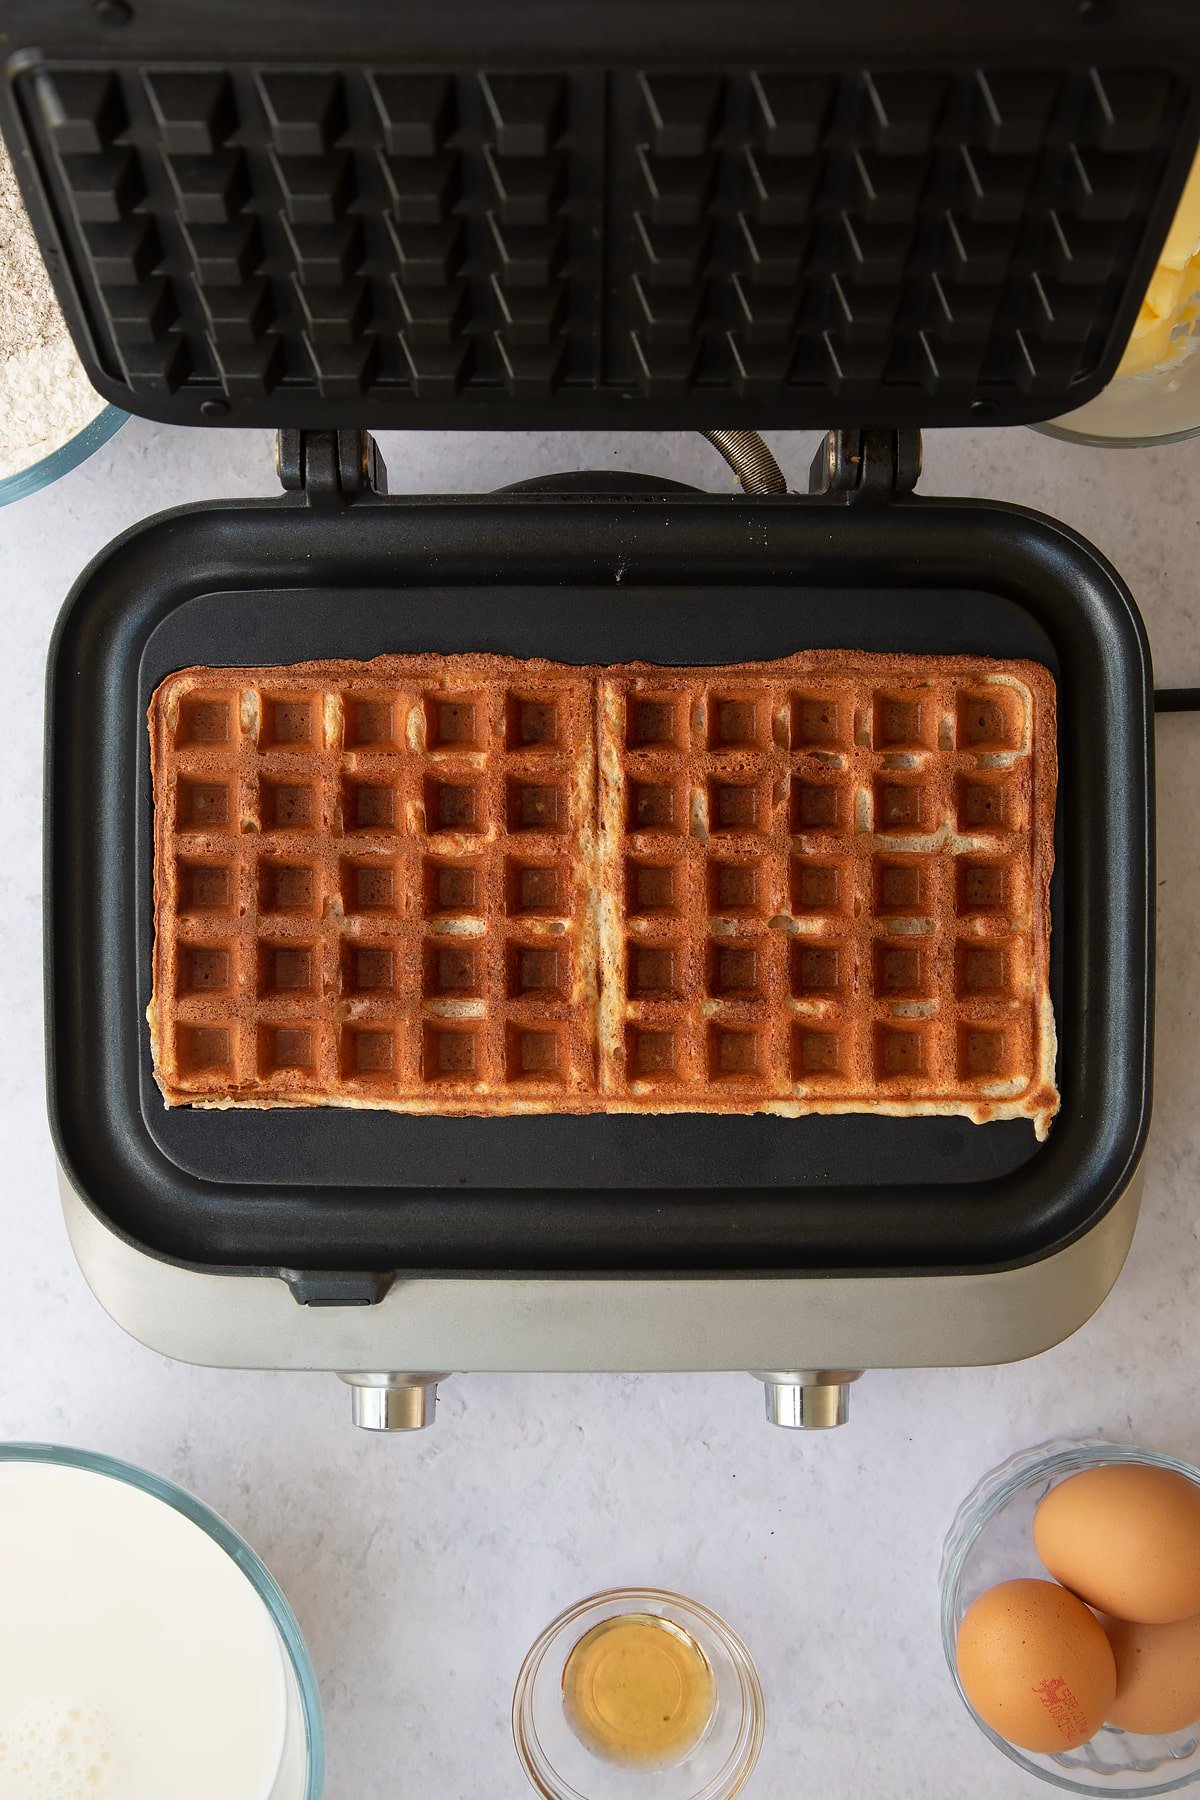 2 cooked wholemeal waffles in a waffle maker. 